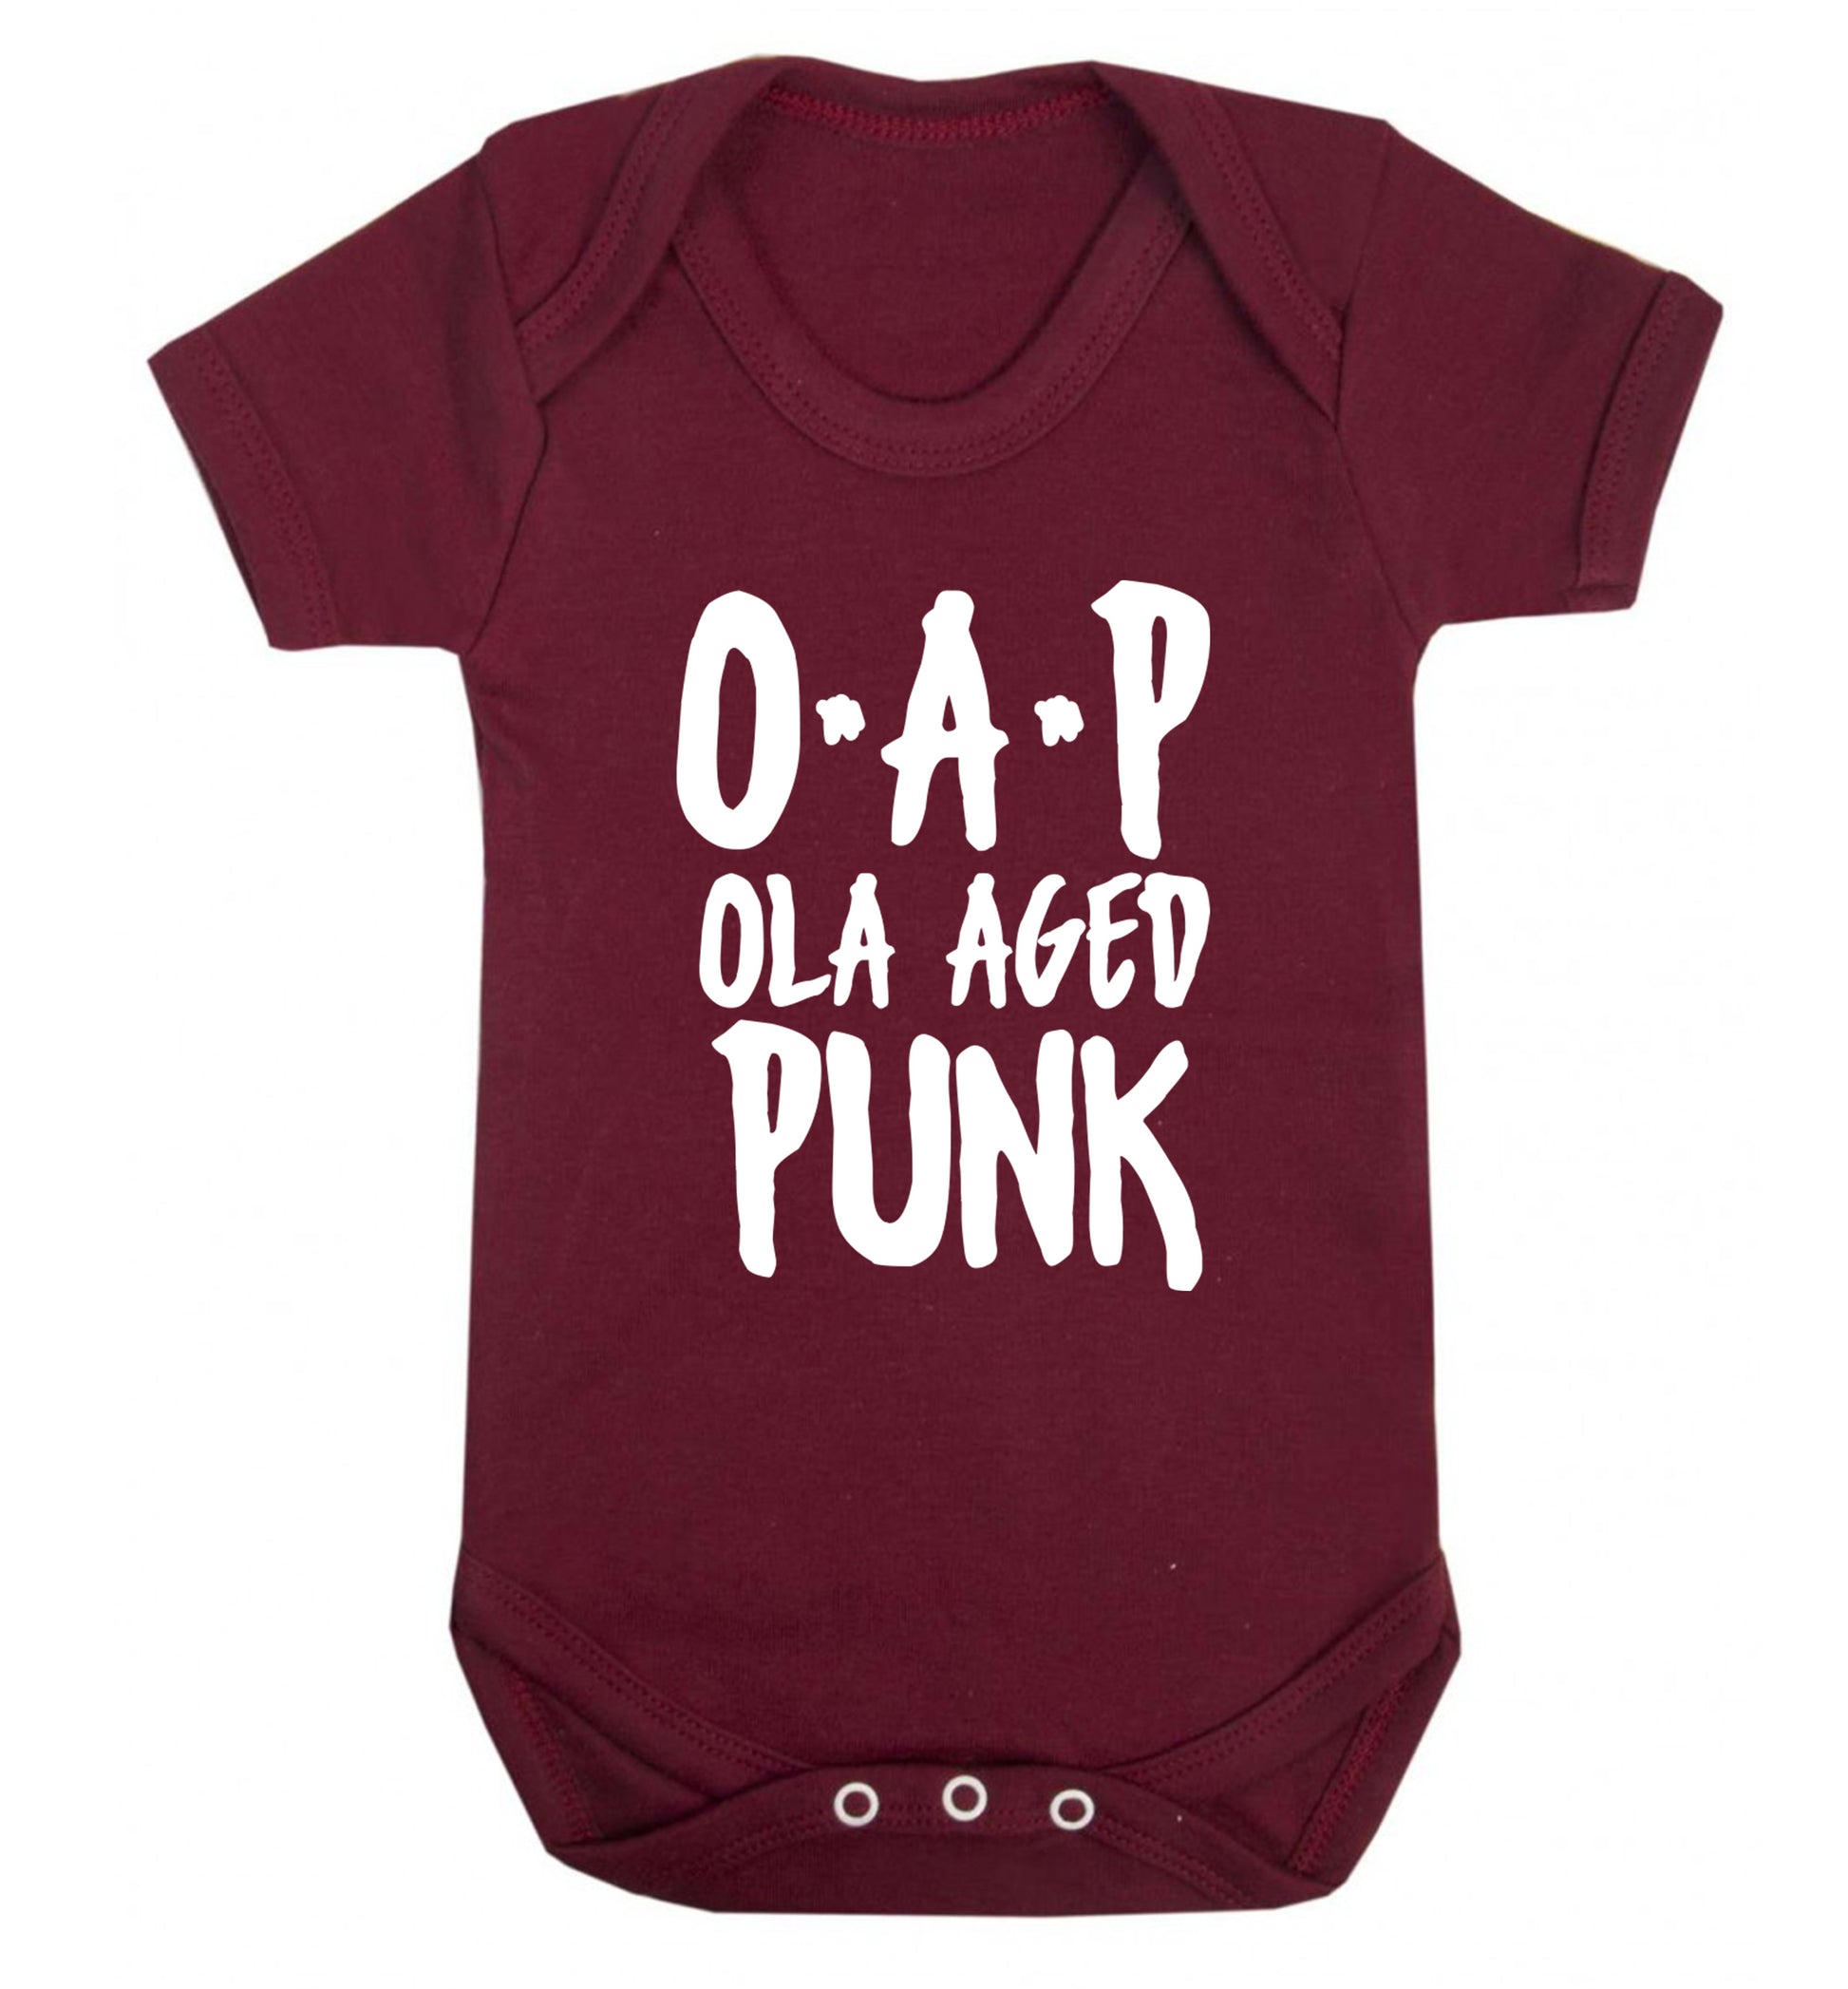 O.A.P Old Aged Punk Baby Vest maroon 18-24 months